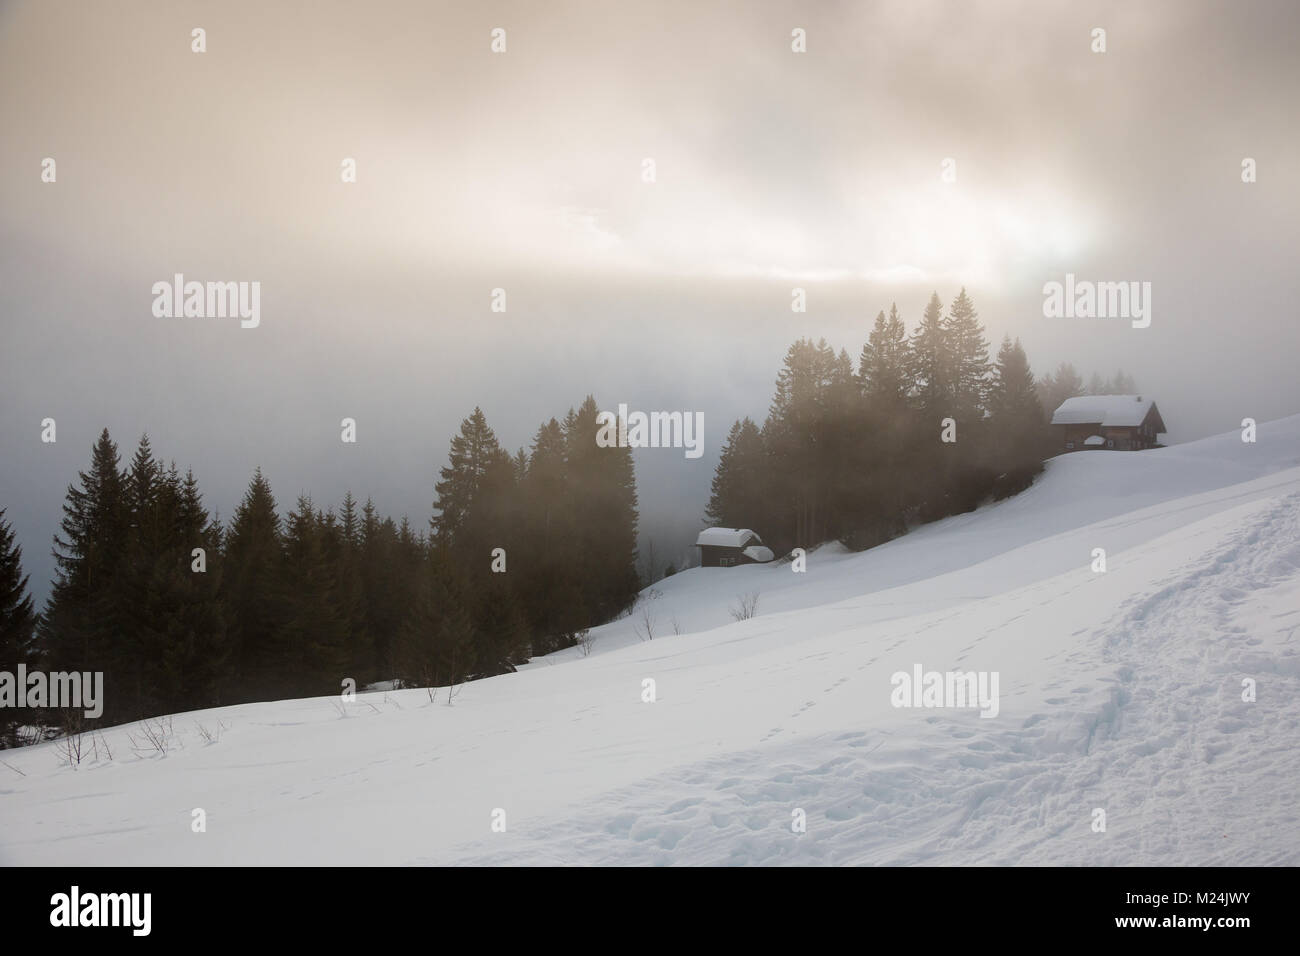 Snow and the dark forest in the mountains Stock Photo